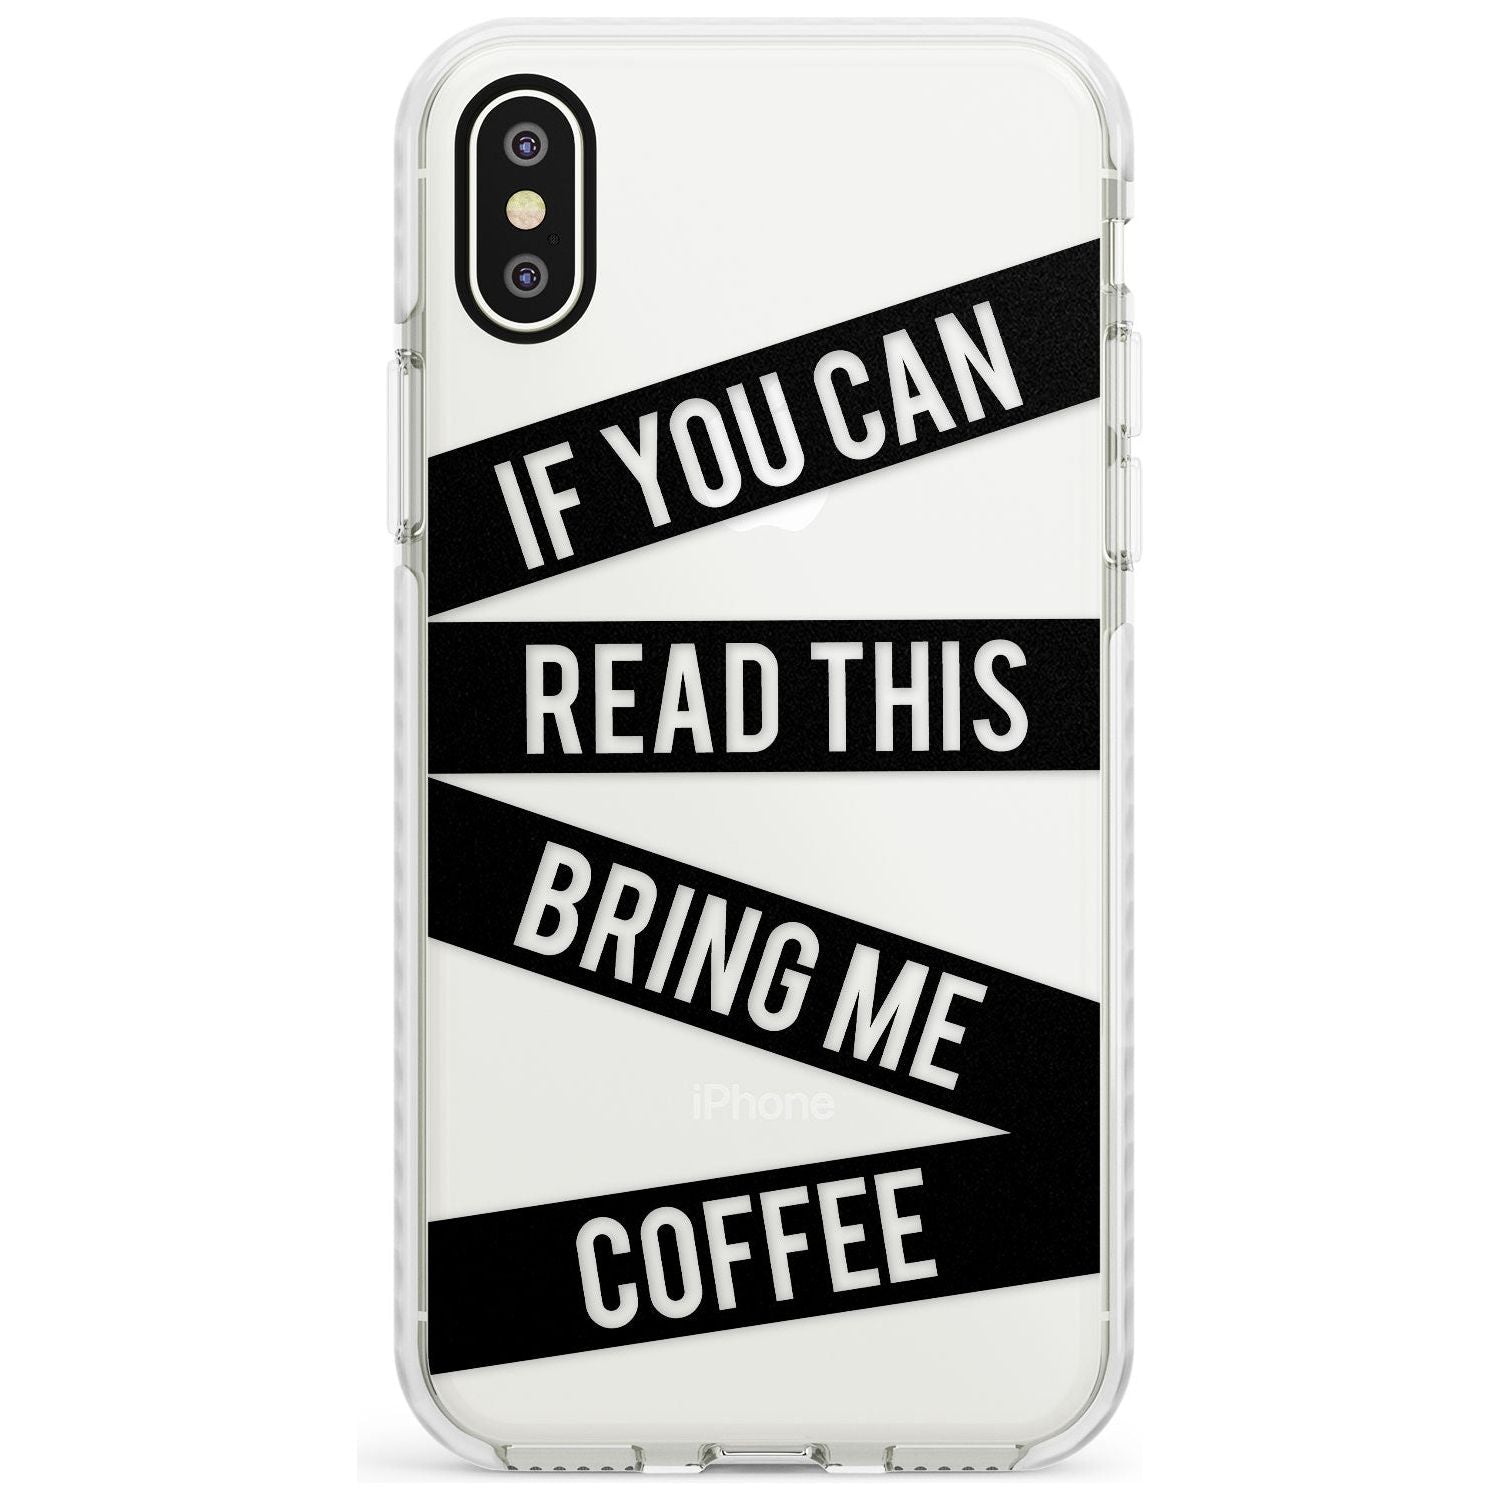 Black Stripes Bring Me Coffee Impact Phone Case for iPhone X XS Max XR